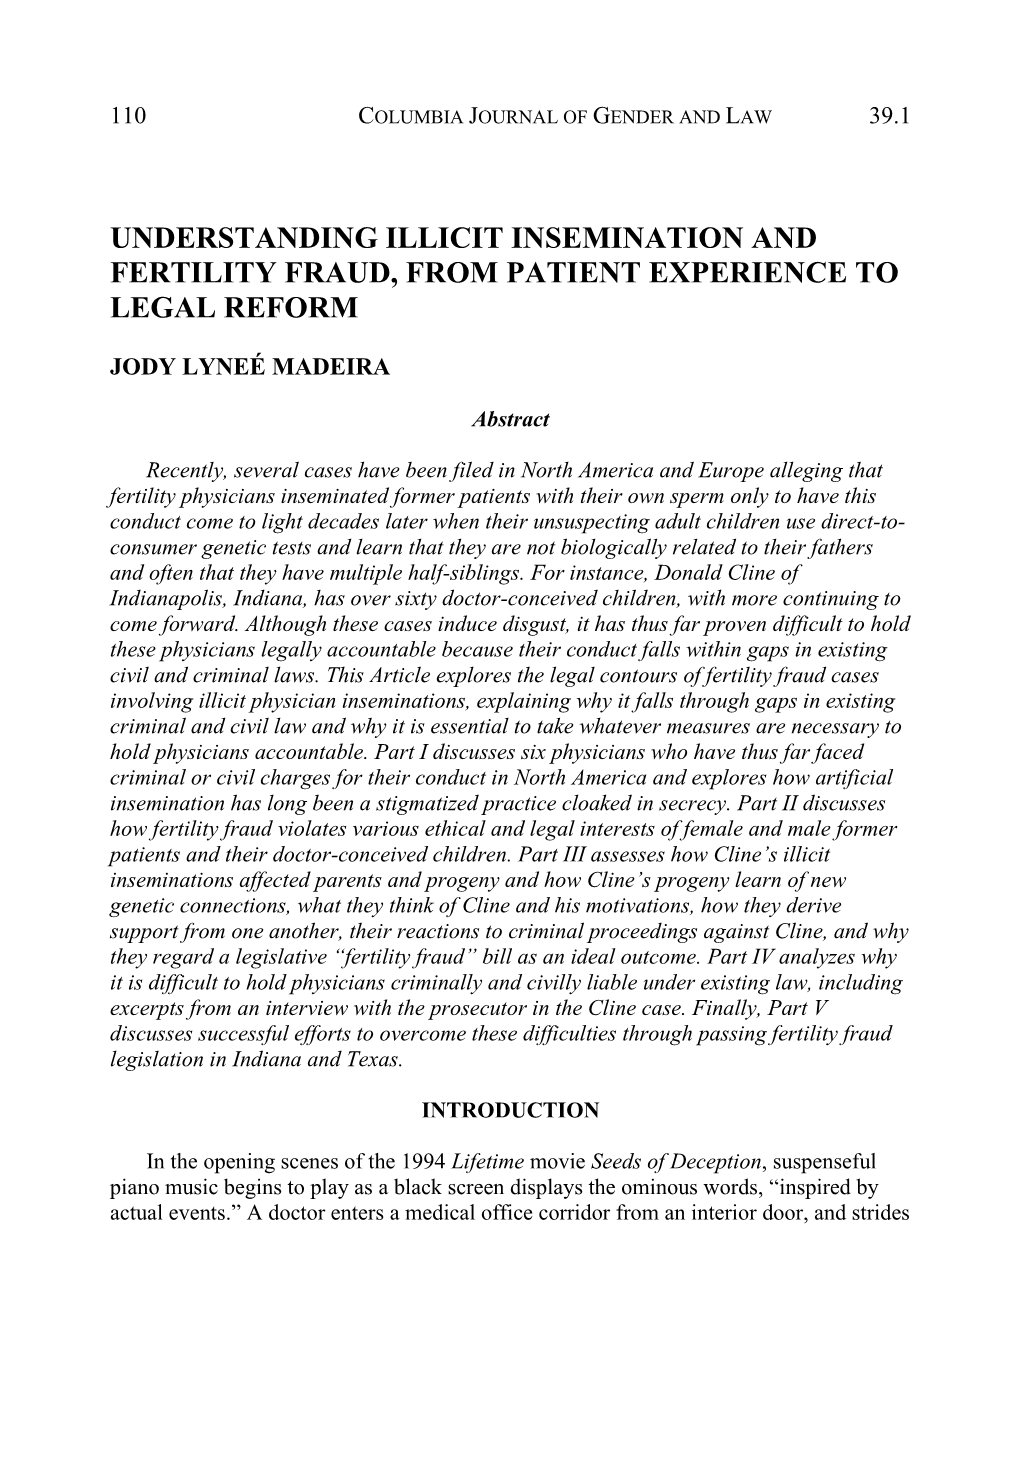 Understanding Illicit Insemination and Fertility Fraud, from Patient Experience to Legal Reform